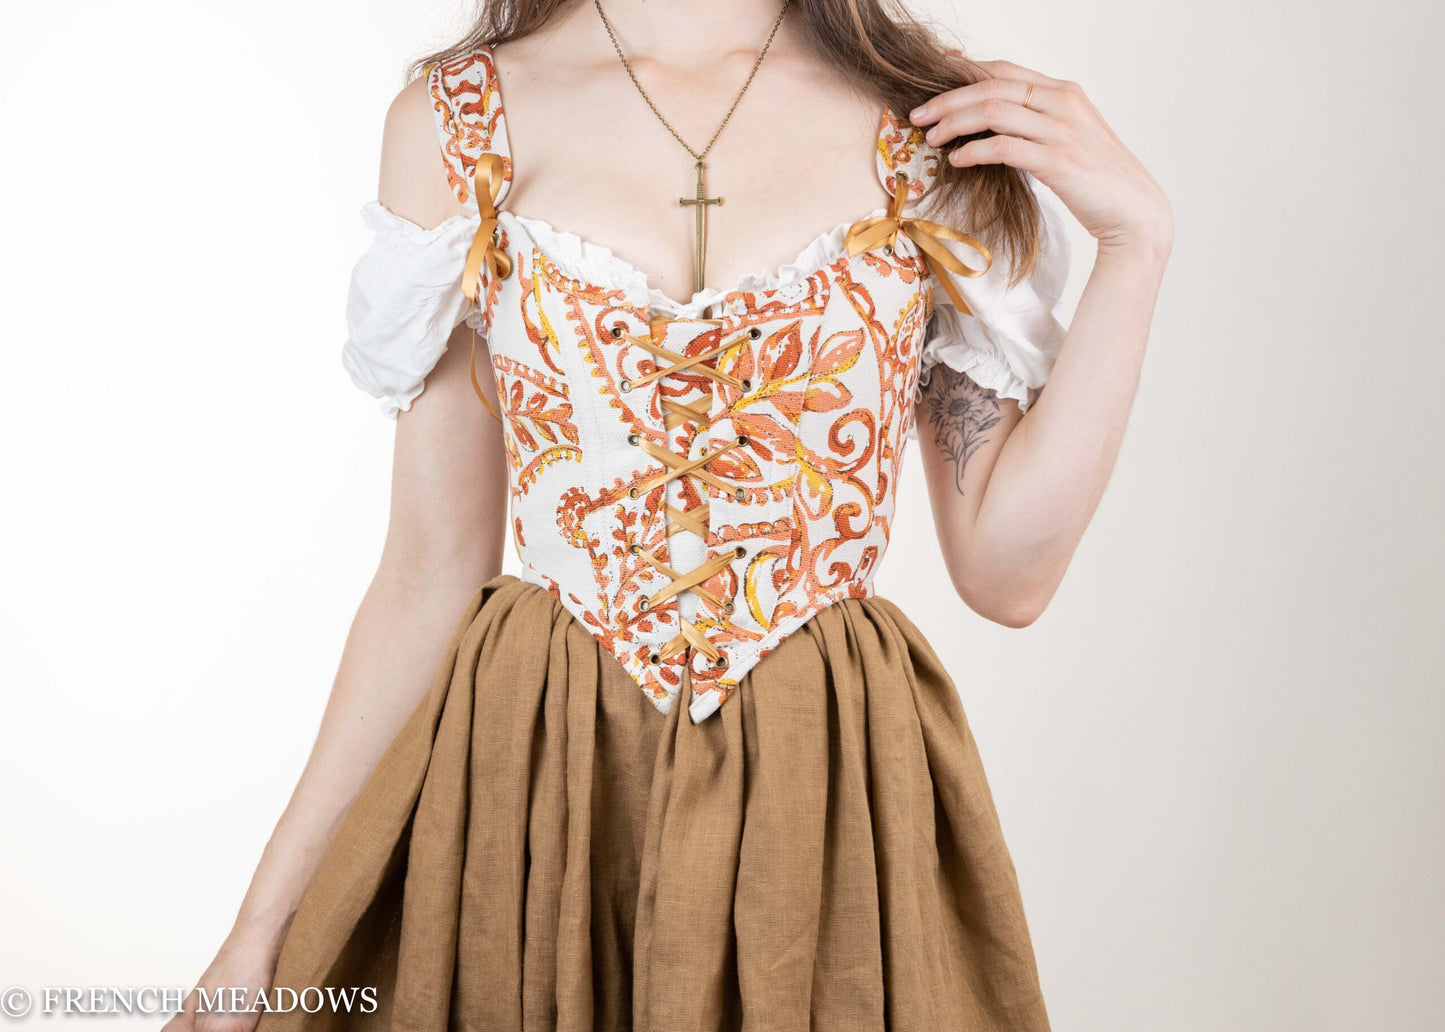 Load image into Gallery viewer, READY TO SHIP Falling Leaves Orange and Gold Paisley Renaissance Corset
